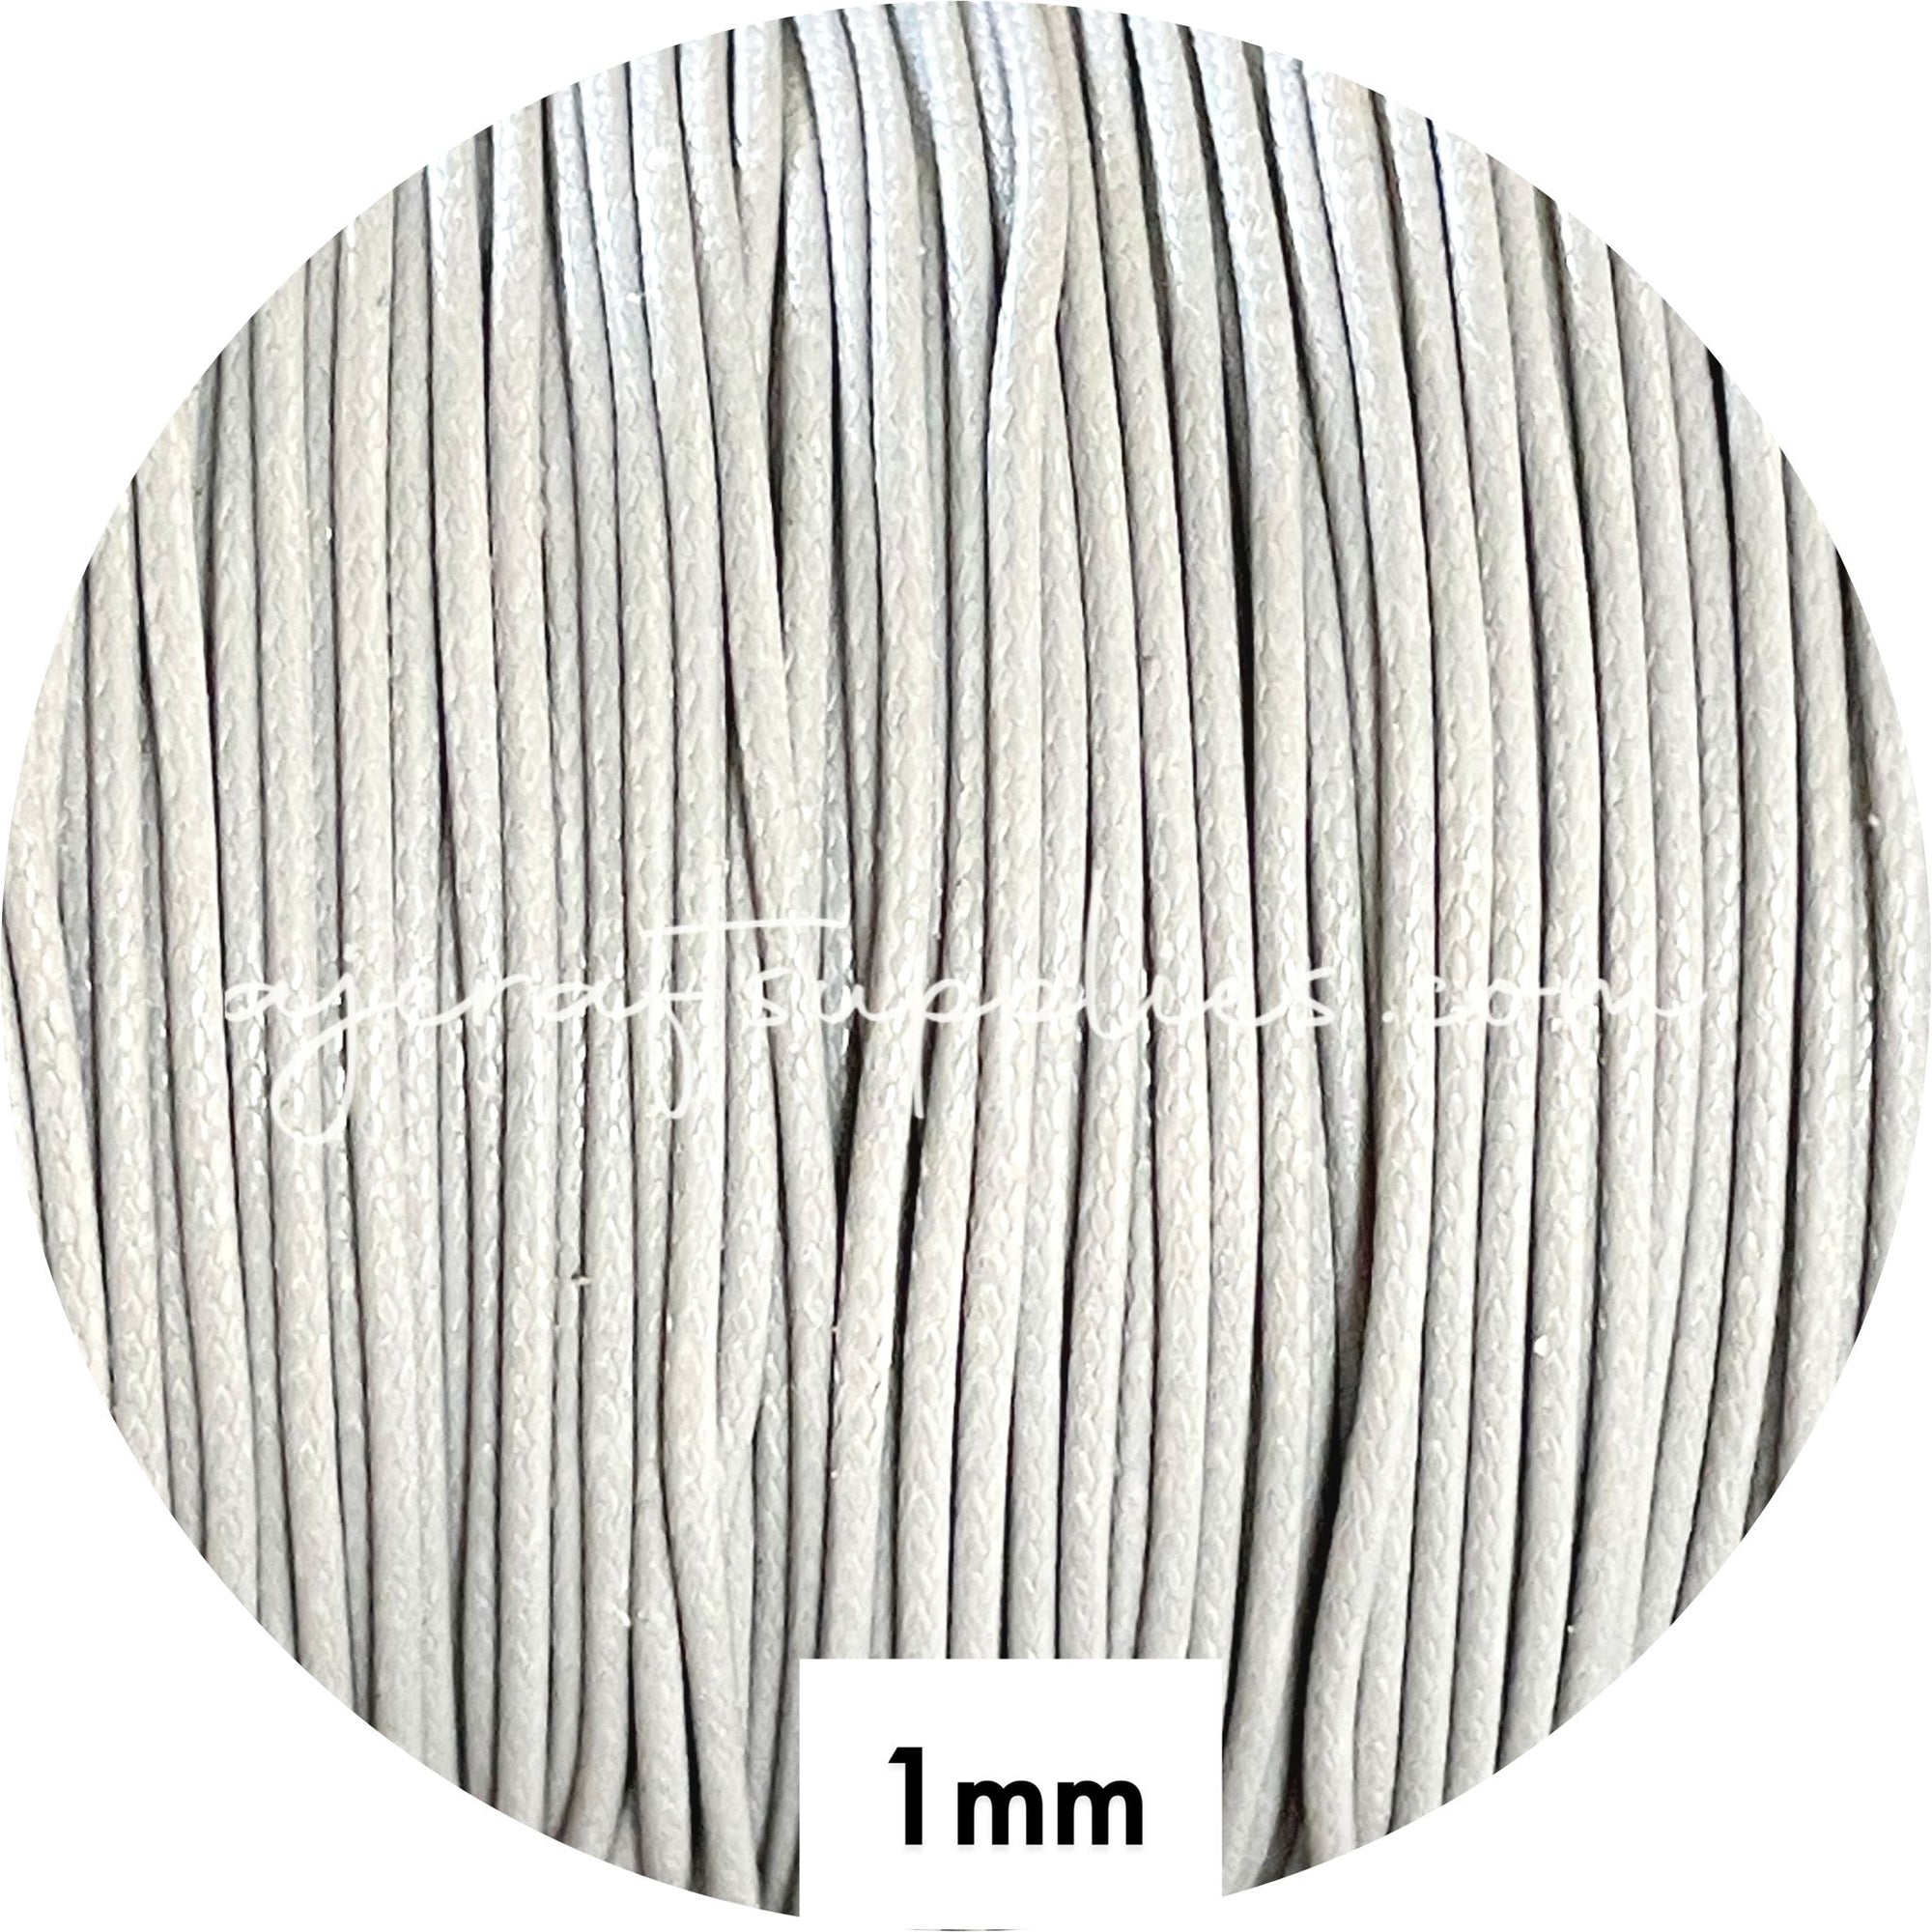 Light Grey - 1mm Waxed Braided Polyester Cord - 5 metres